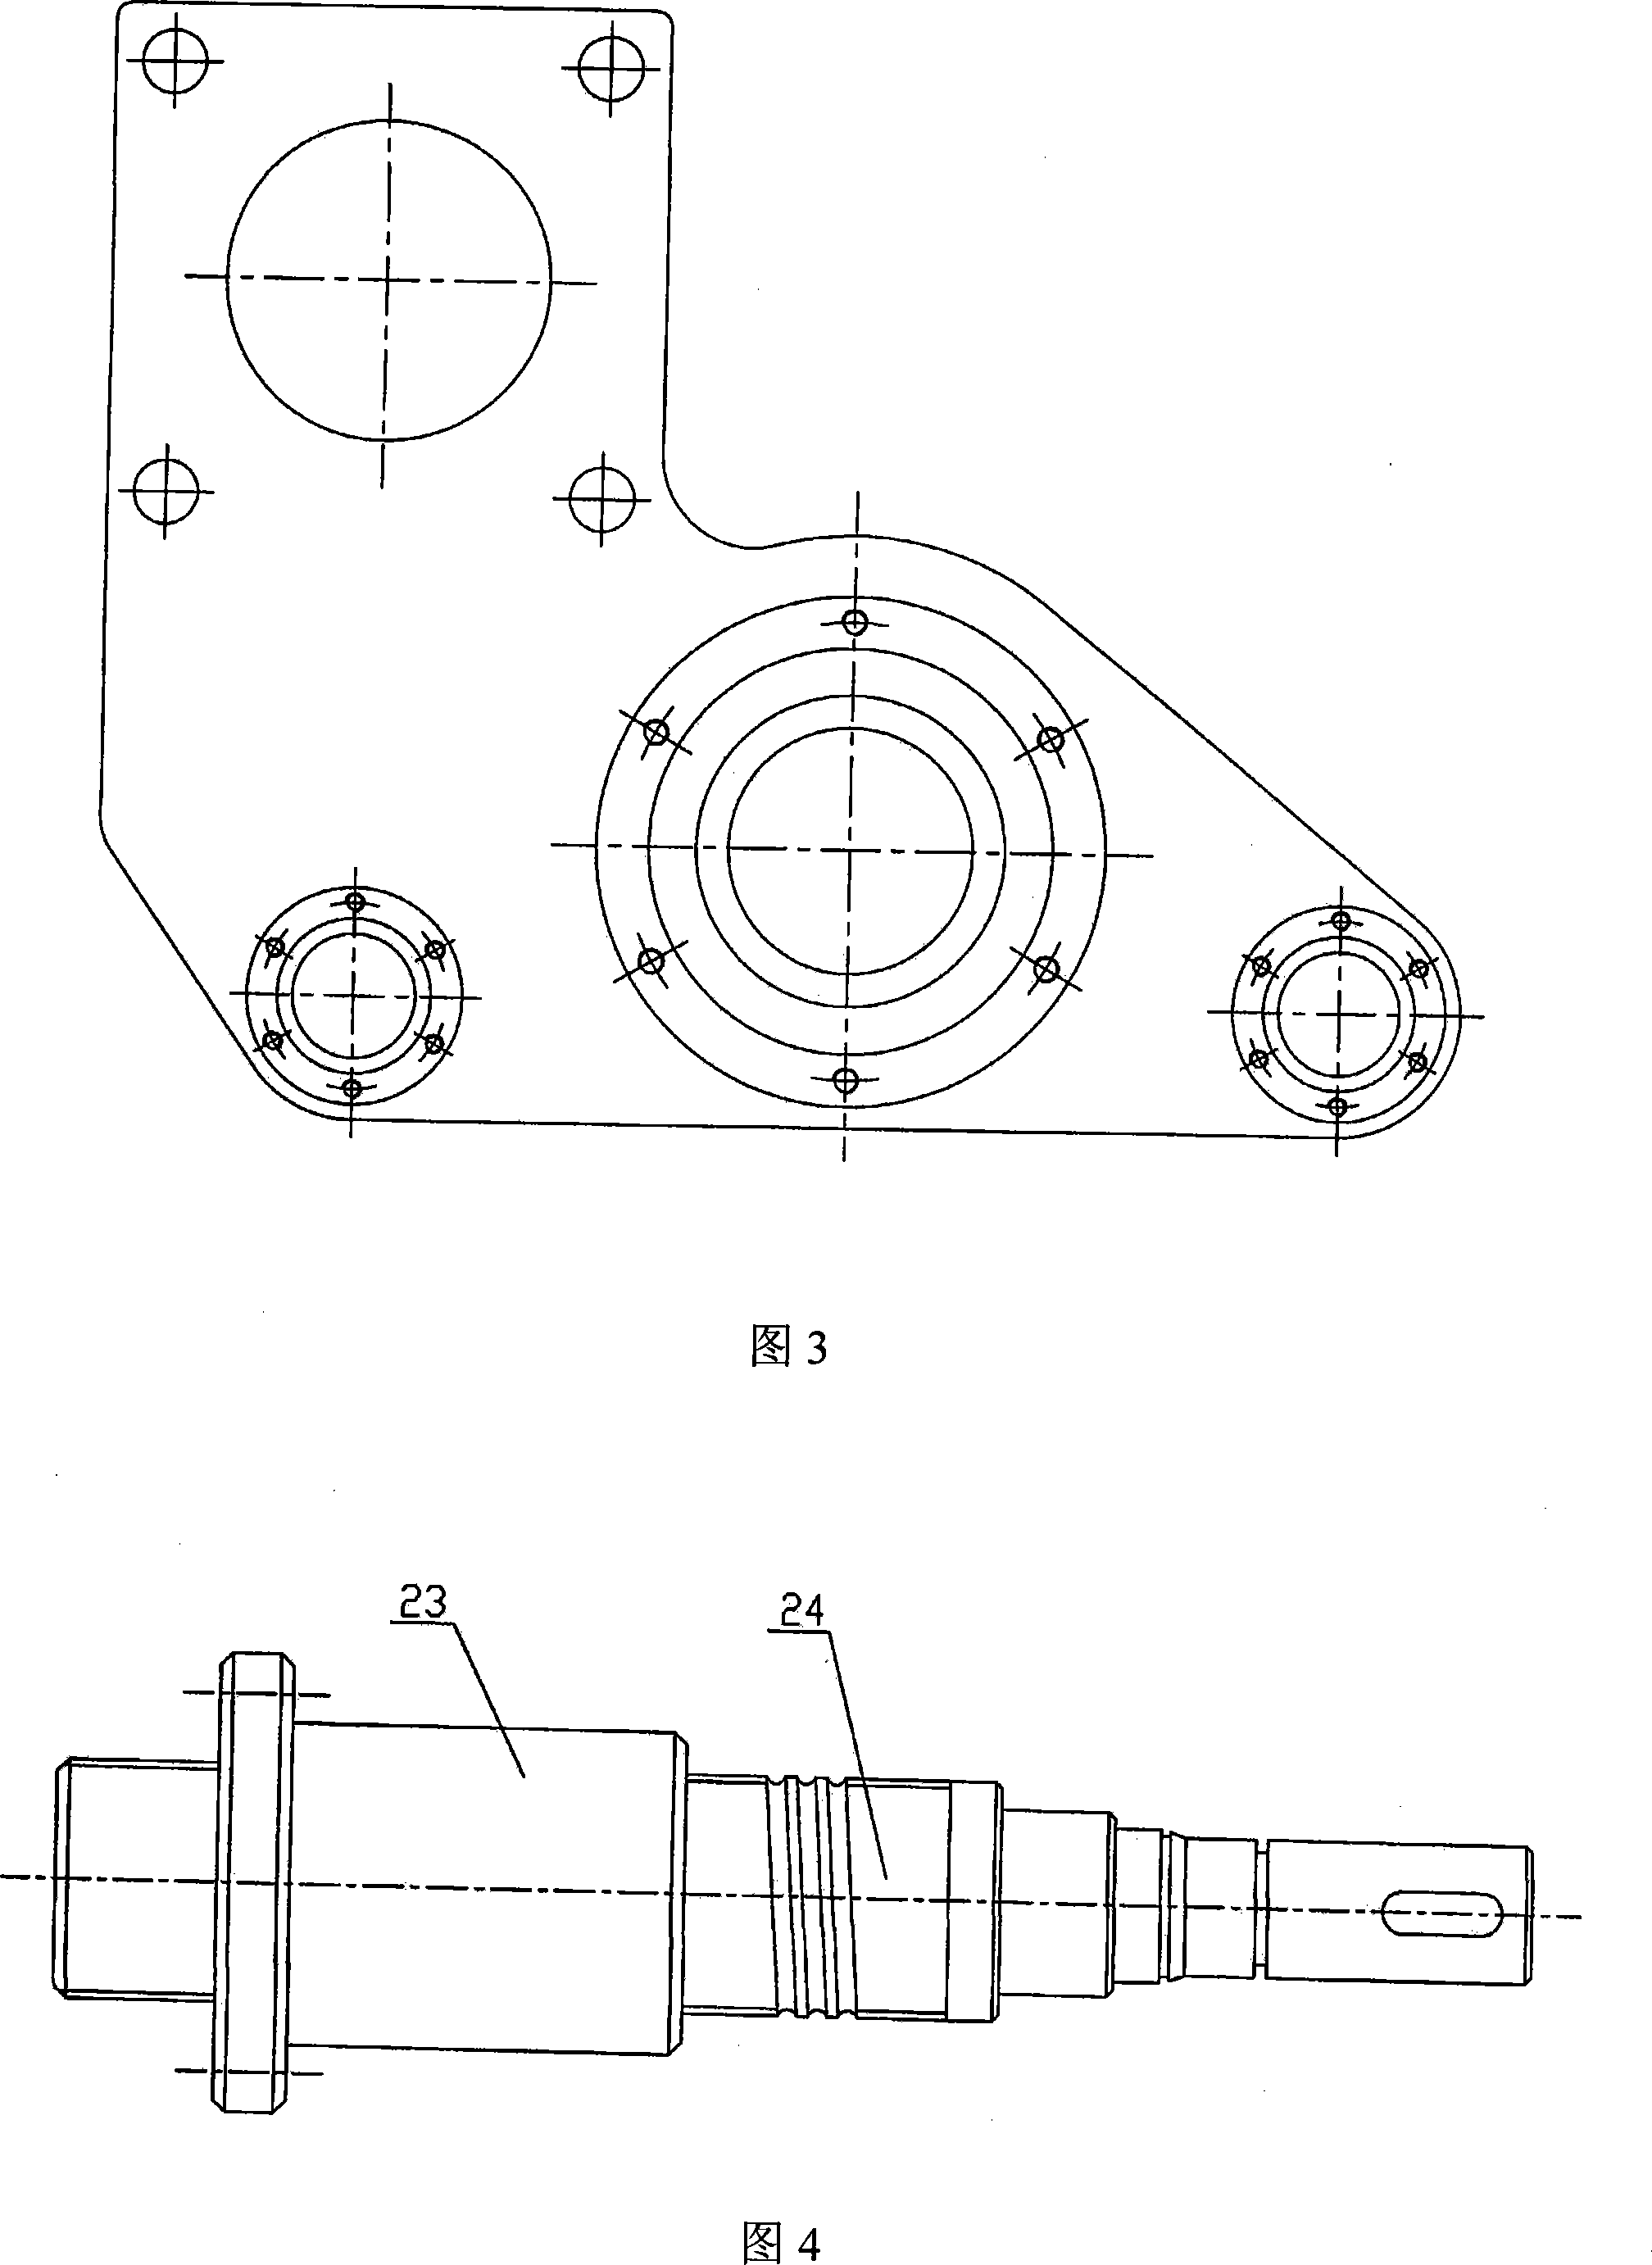 Electrical ejection forming method and device for bonded permanent magnet